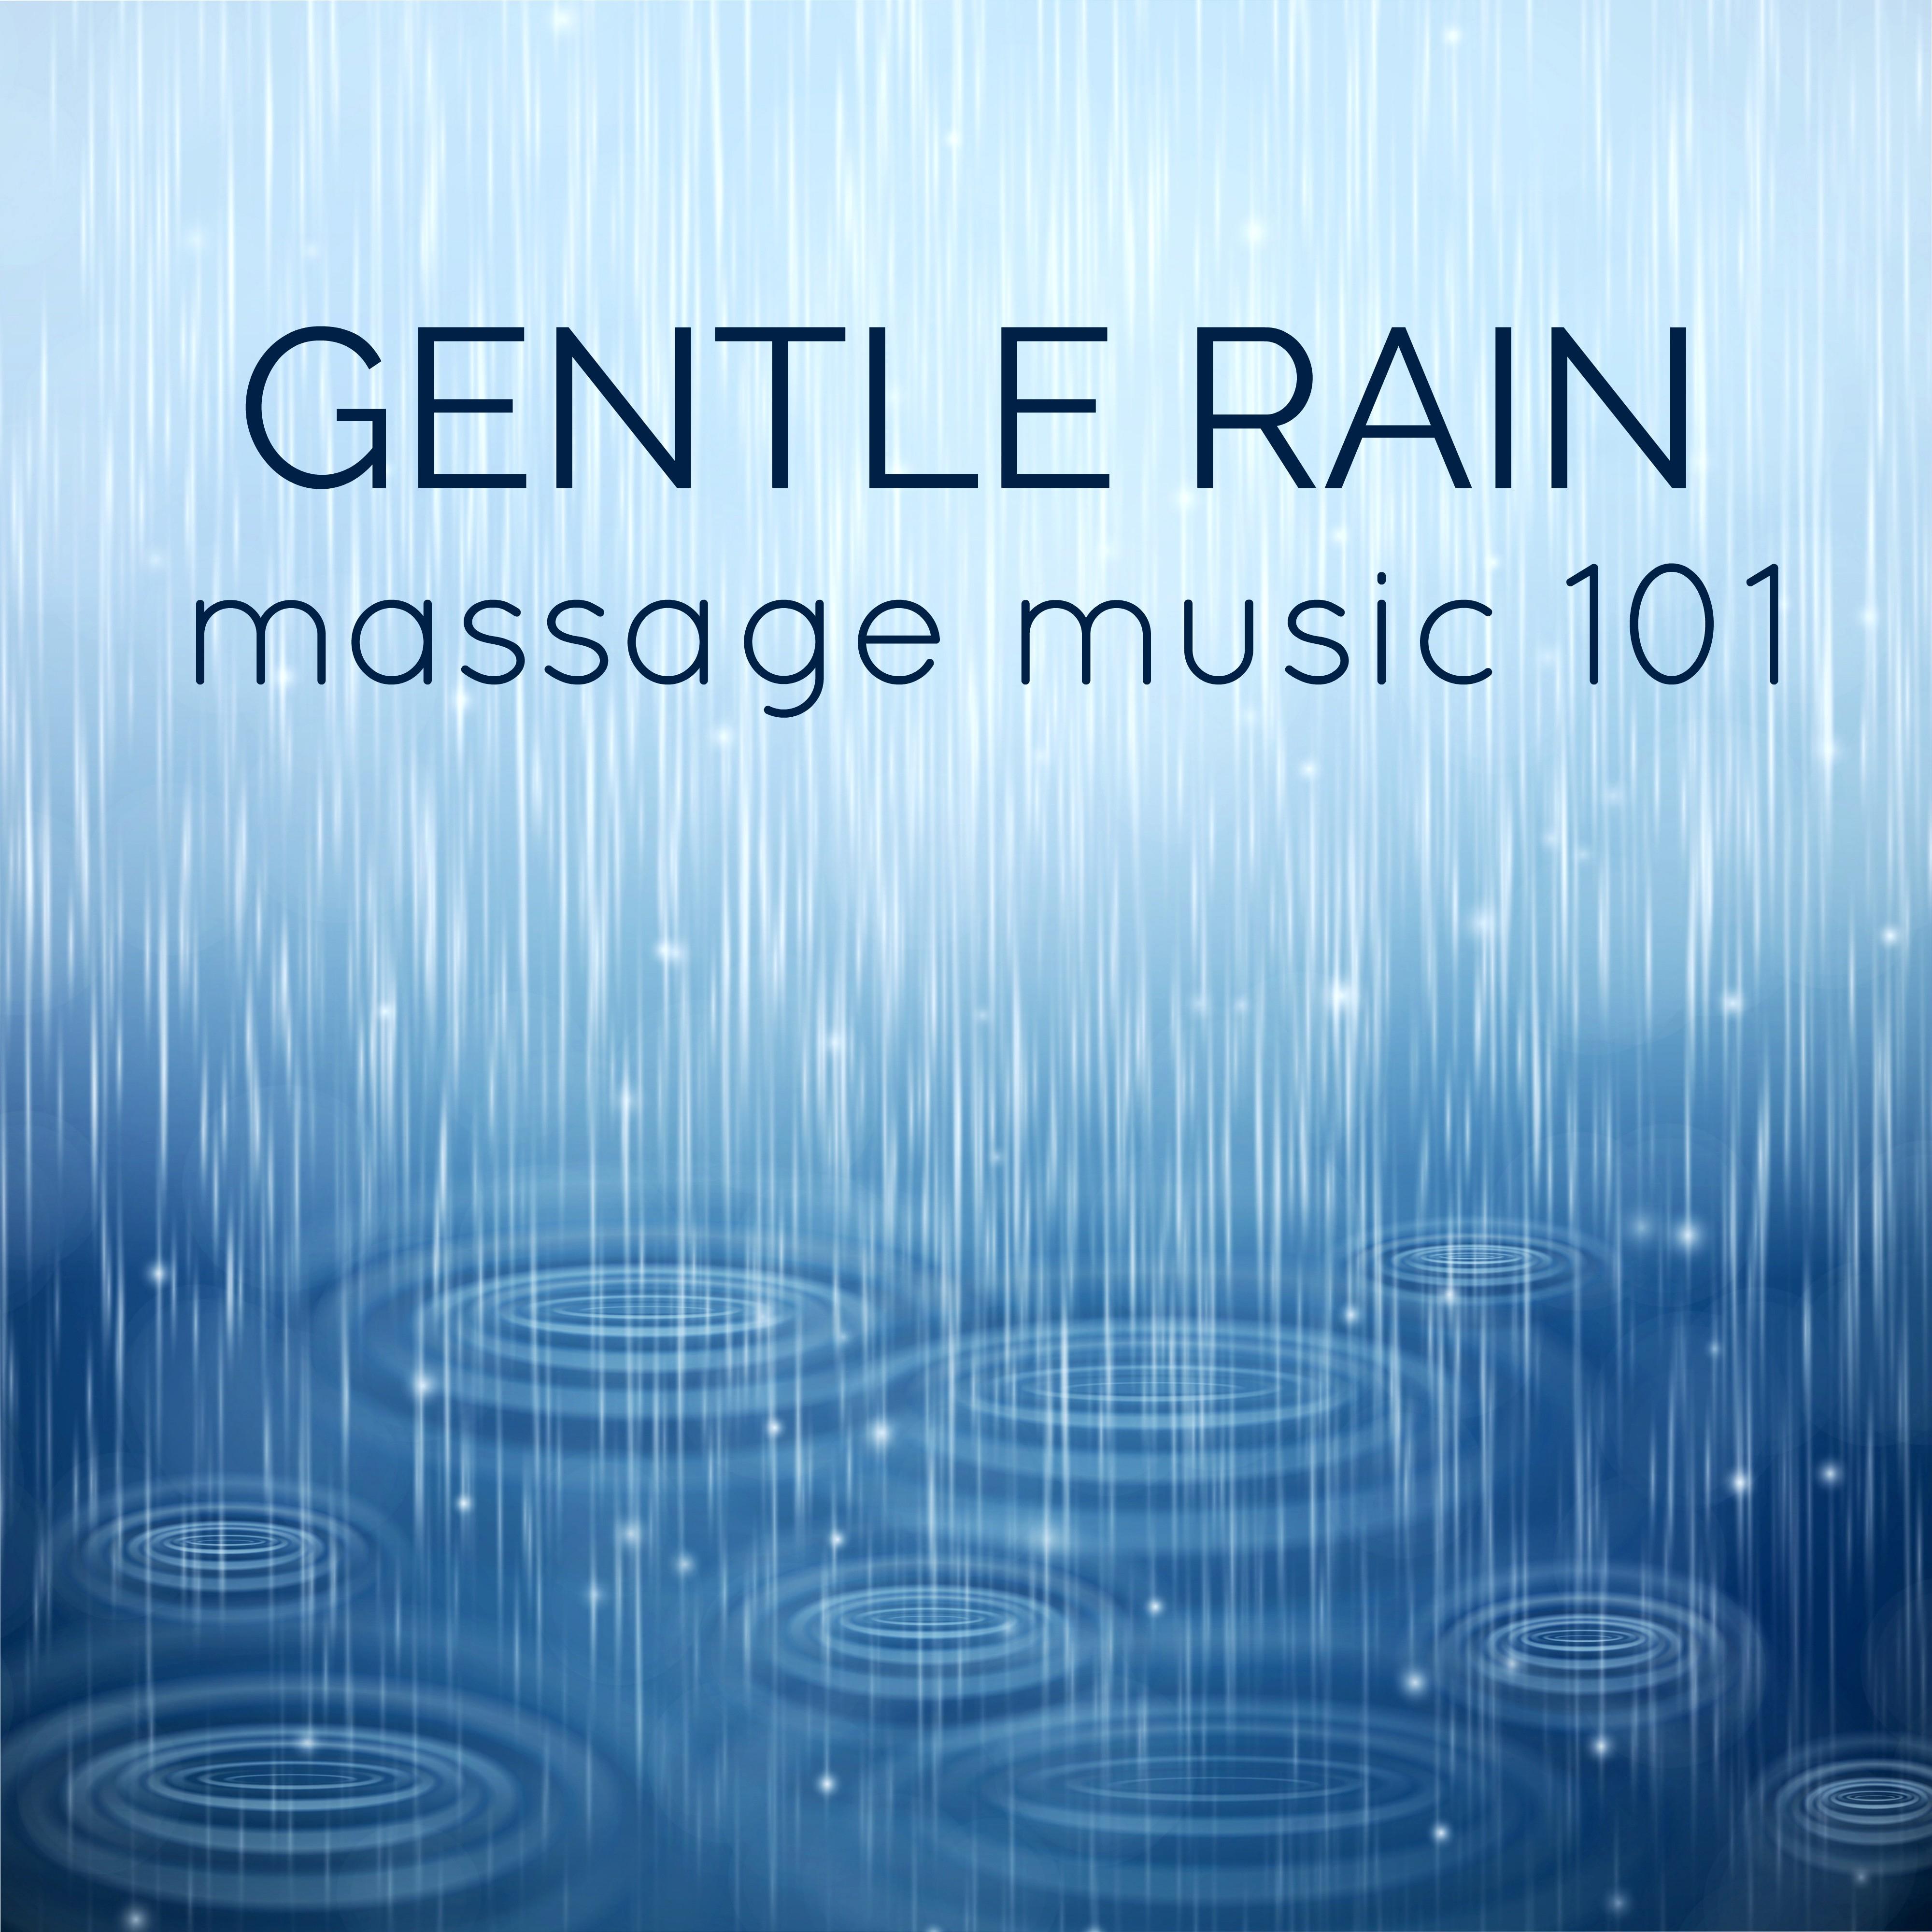 Gentle Rain - Massage Music: Relaxing, Serene & Calming Spa Music for Relaxation, Meditation, Spa & Stress Relief